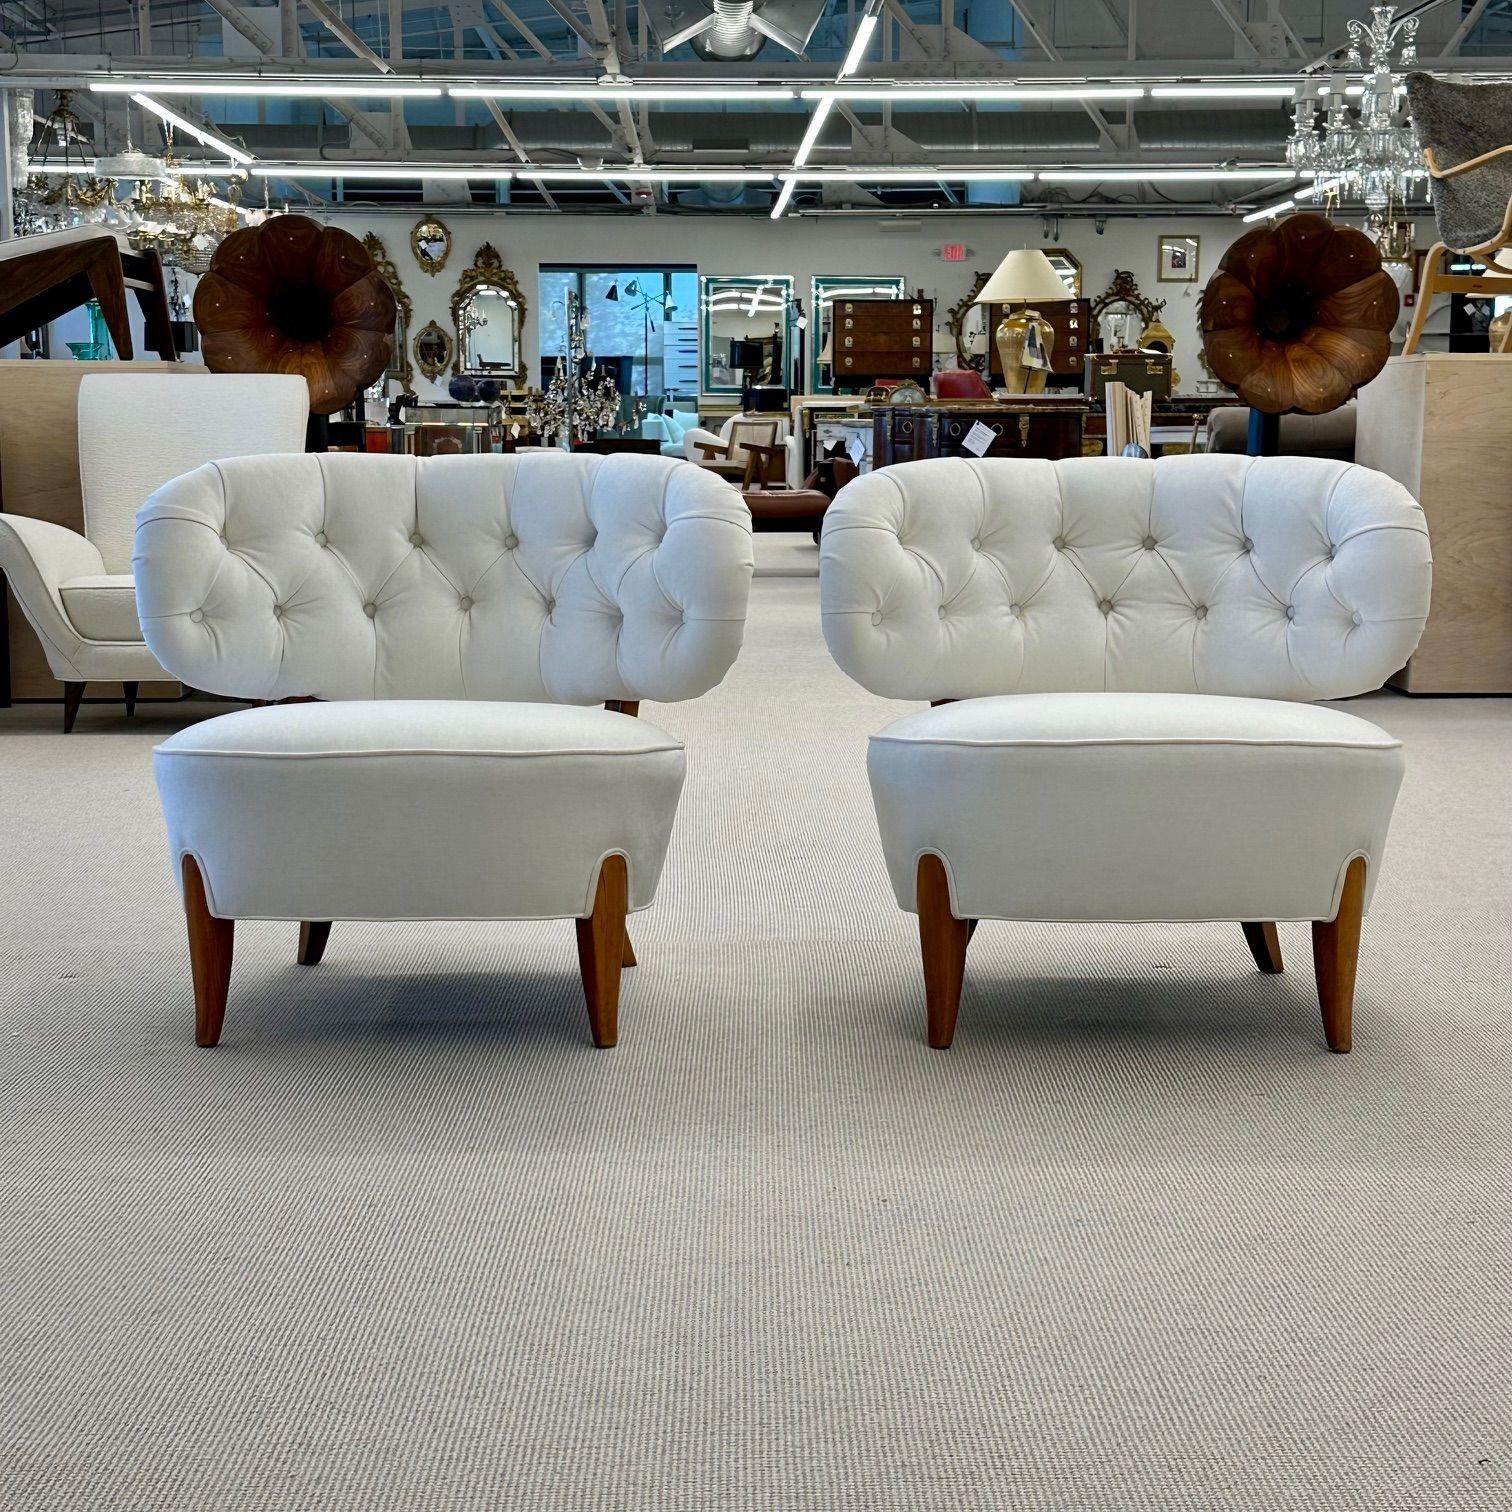 Pair of Swedish Mid-Century Modern Otto Schultz Lounge / Slipper Chairs, Velvet

Pair of 'Schulz' easy chairs by Otto Schulz having new Alabaster linen velvet upholstery and exposed wooden legs original to the mid-century time period. Each chair has